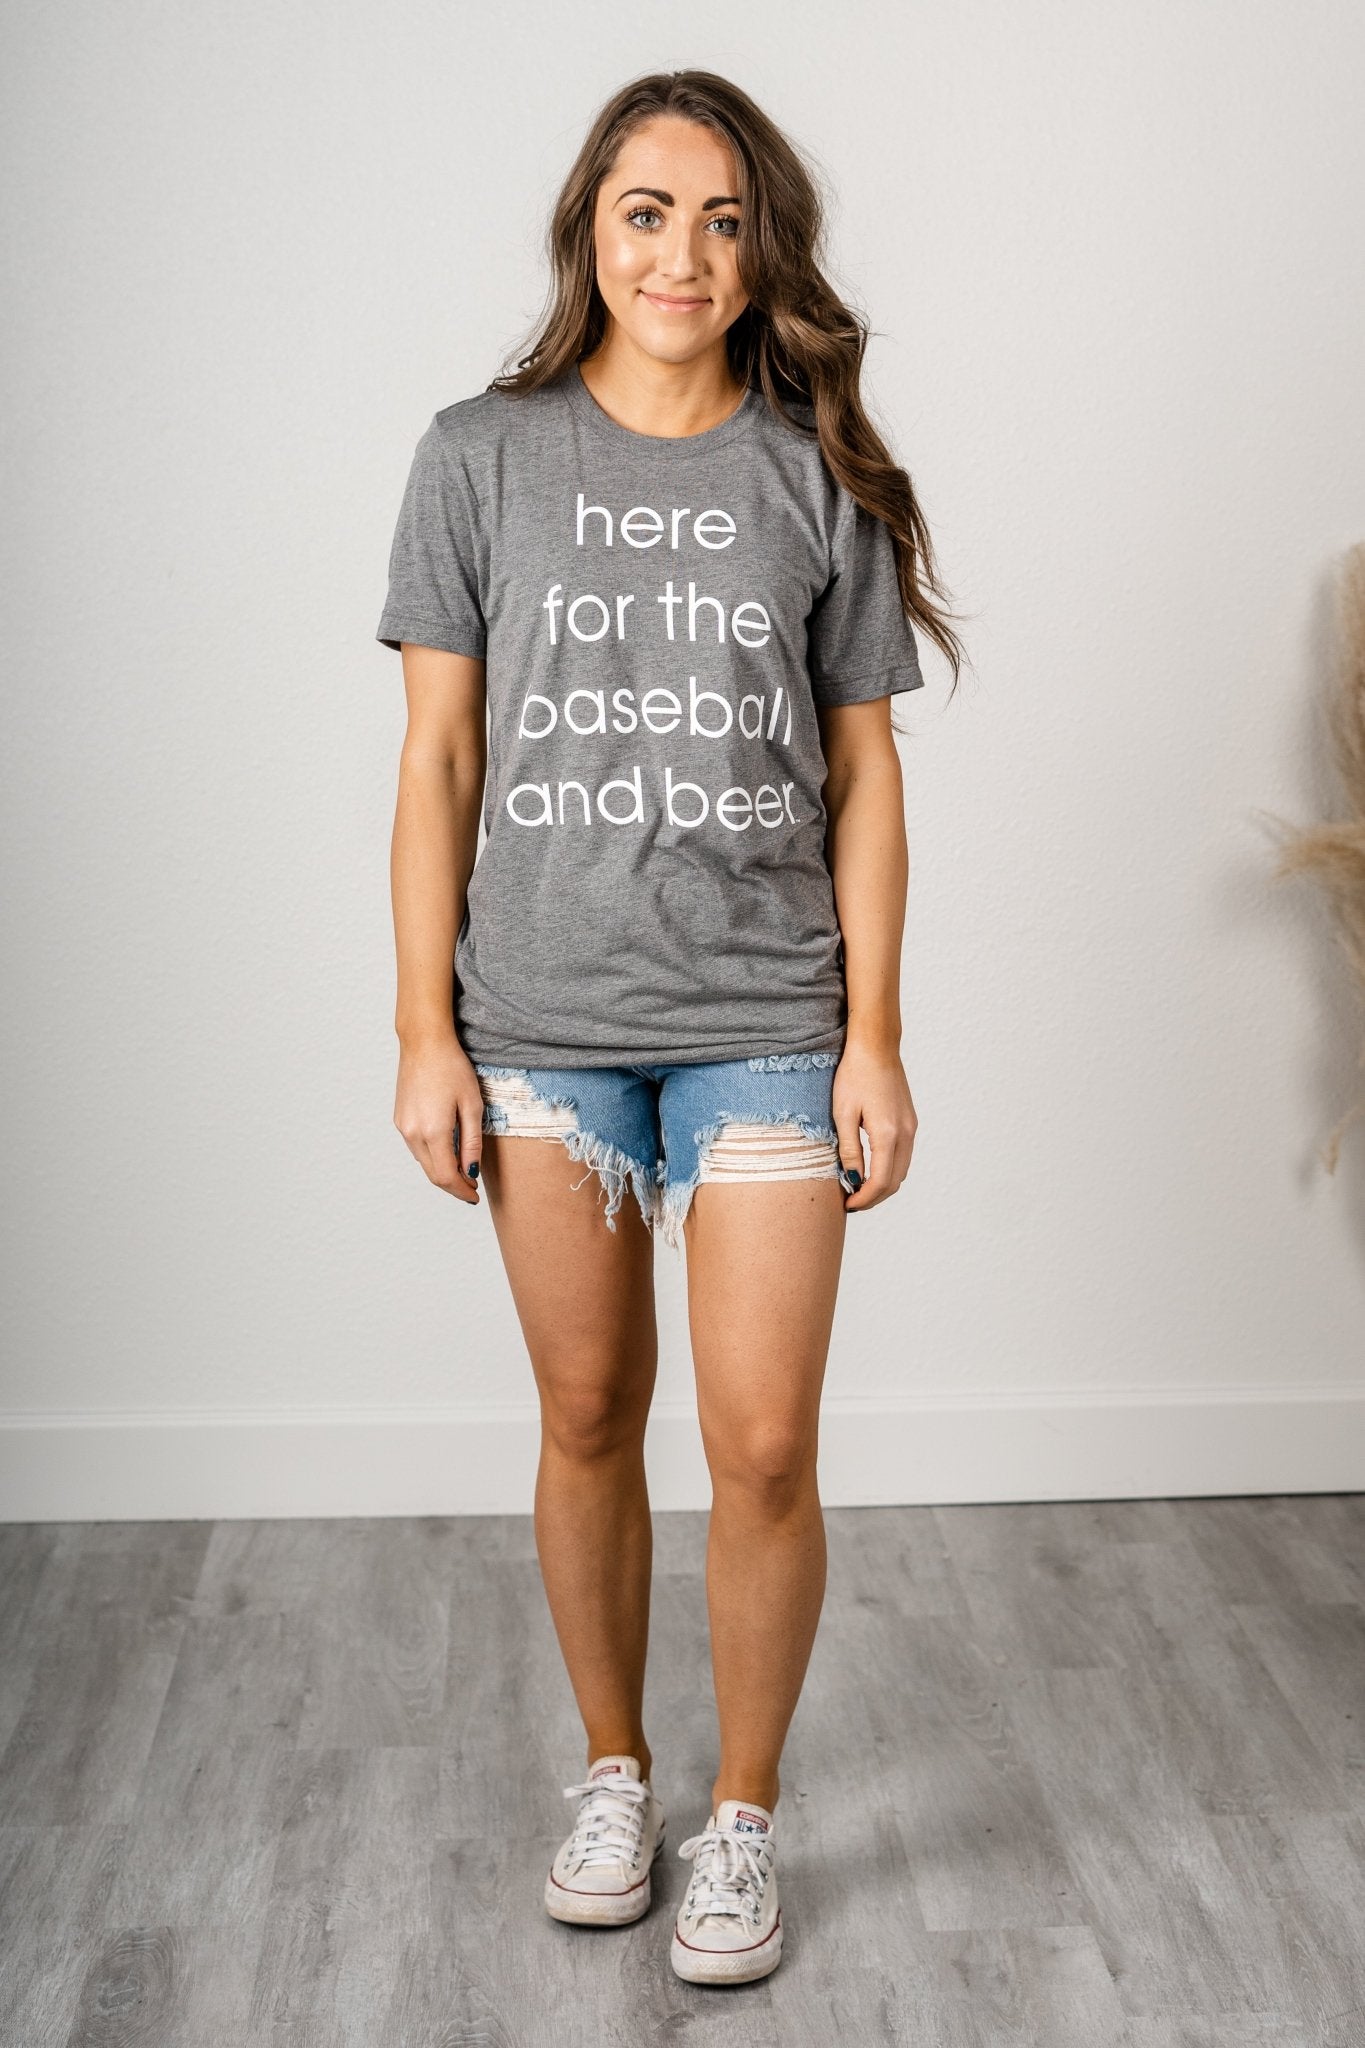 Here for the baseball & beer unisex short sleeve t-shirt grey - Trendy T-shirts - Cute Graphic Tee Fashion at Lush Fashion Lounge Boutique in Oklahoma